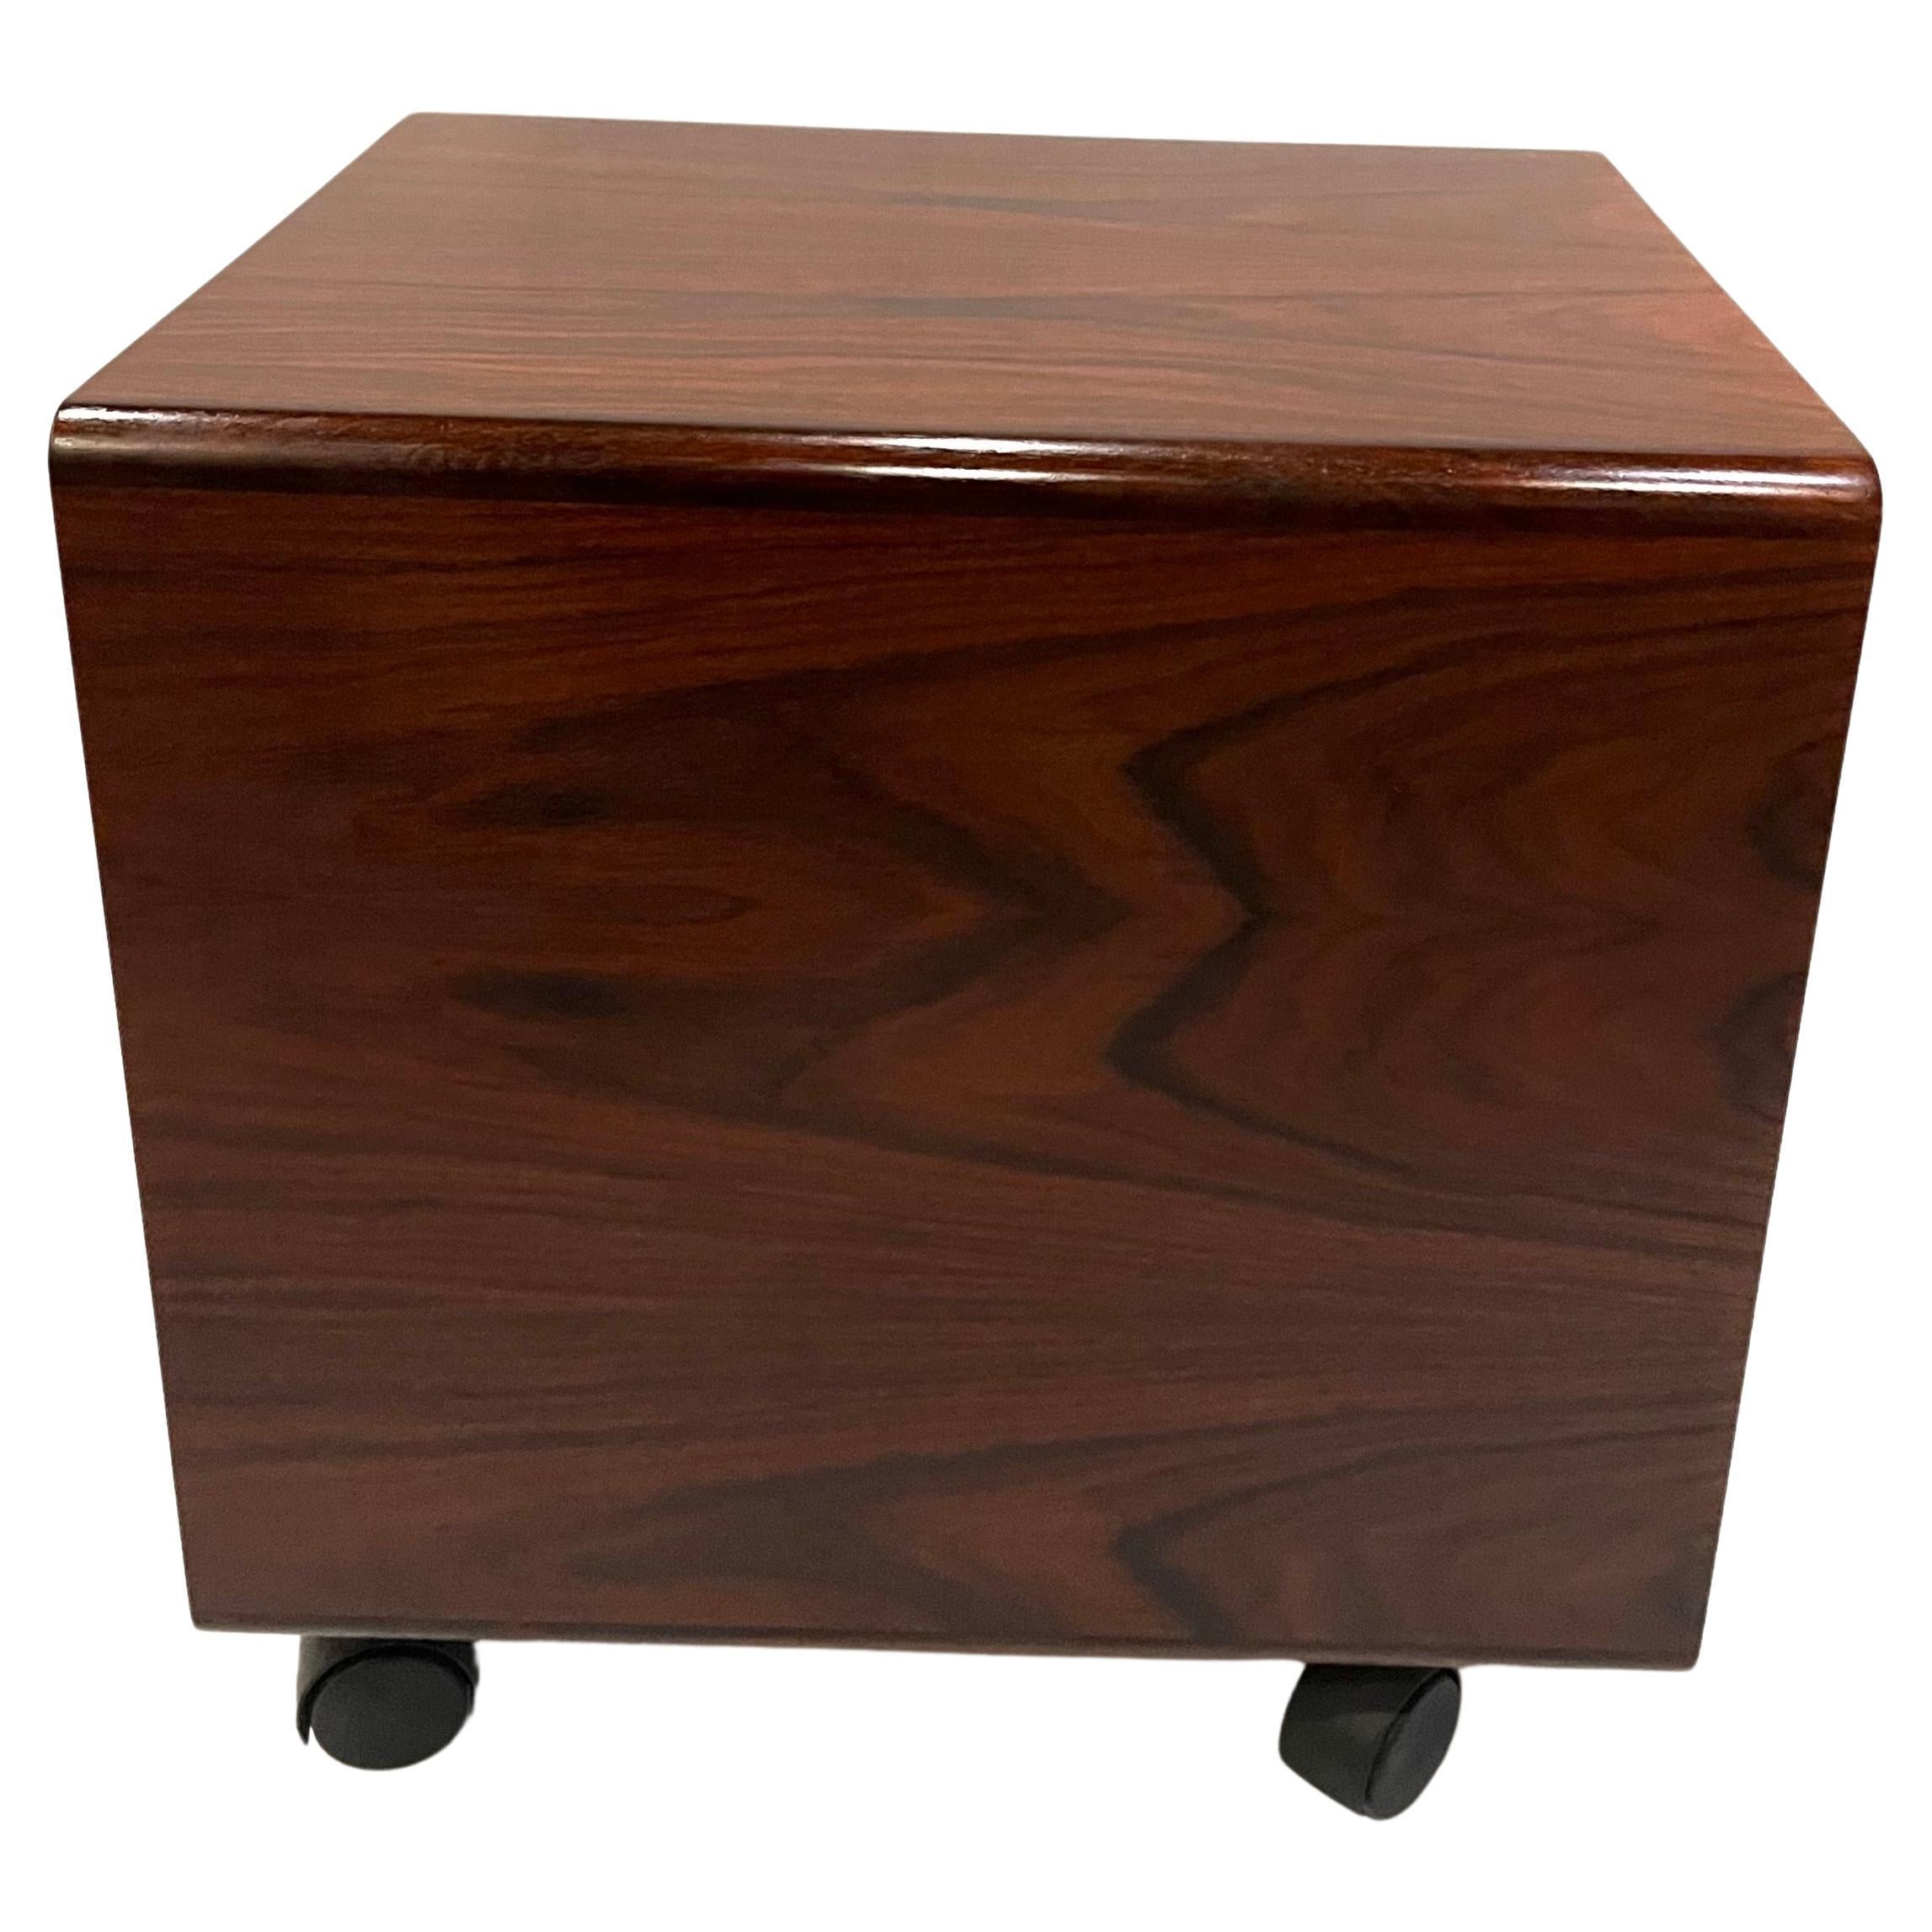 Post-Modern Post Modern Rosewood File Cabinet by Sibast Mobler Design by Posborg & Meyhoff For Sale